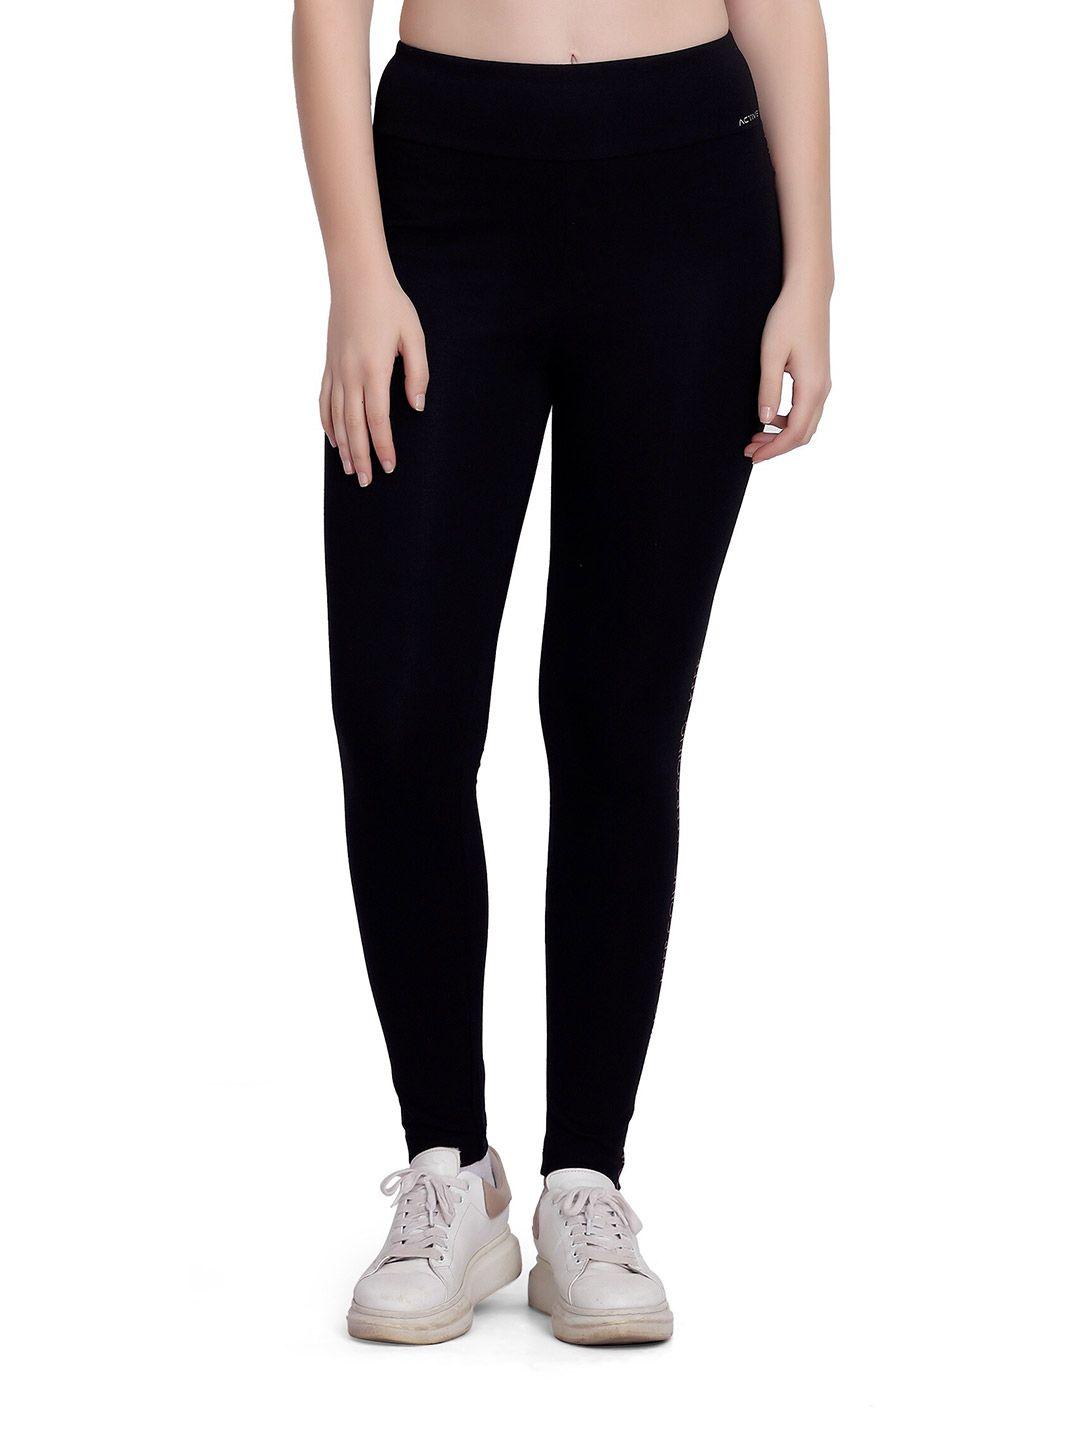 maysixty slim-fit ankle-length gym tights